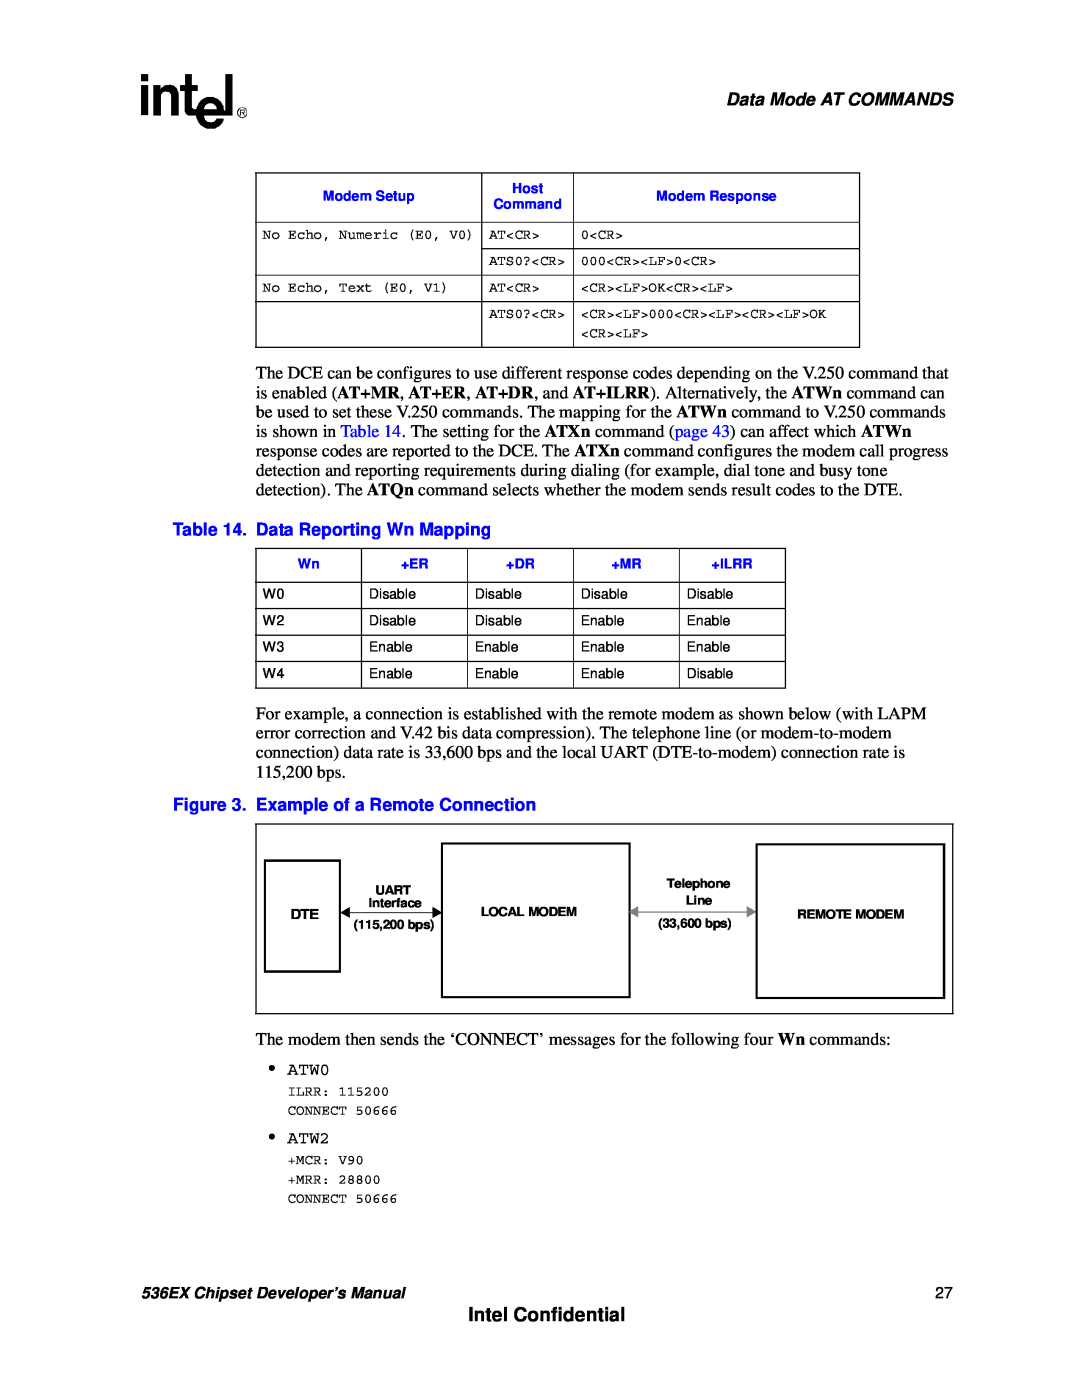 Intel 536EX Intel Confidential, Data Mode AT COMMANDS, Data Reporting Wn Mapping, Example of a Remote Connection, •ATW0 